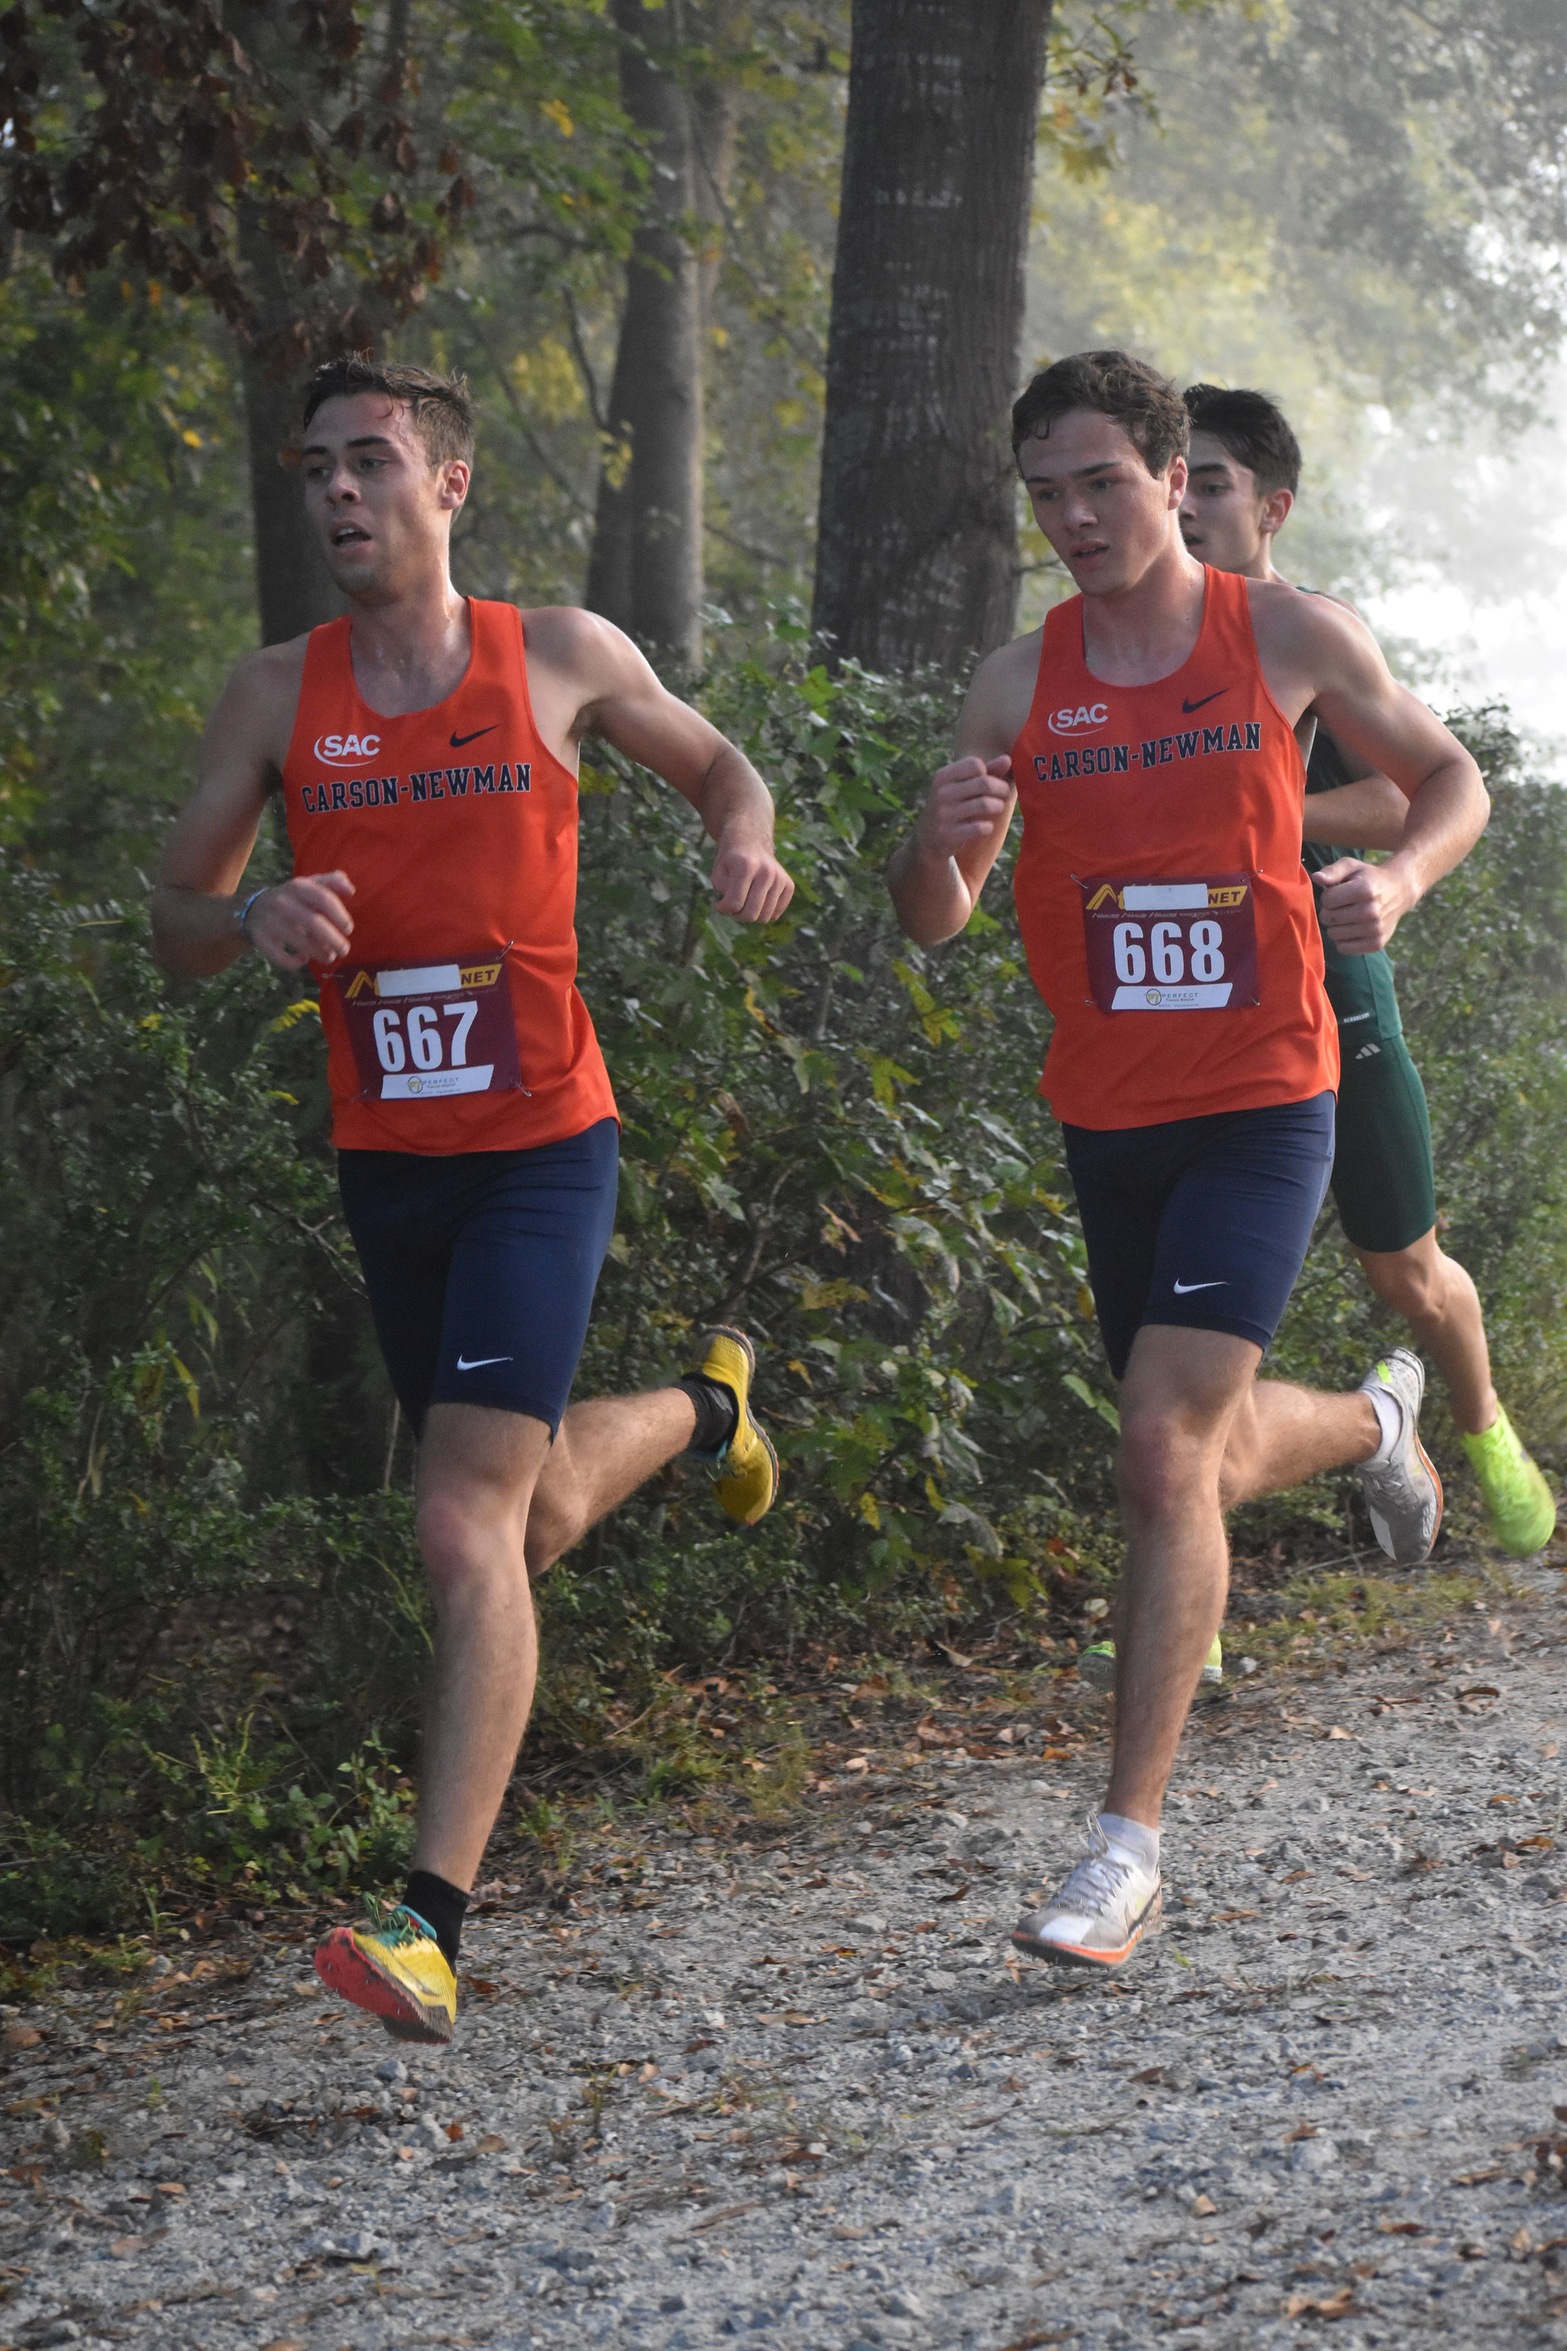 Eagles Impress Amongst Competitive Field at Royals XC Challenge